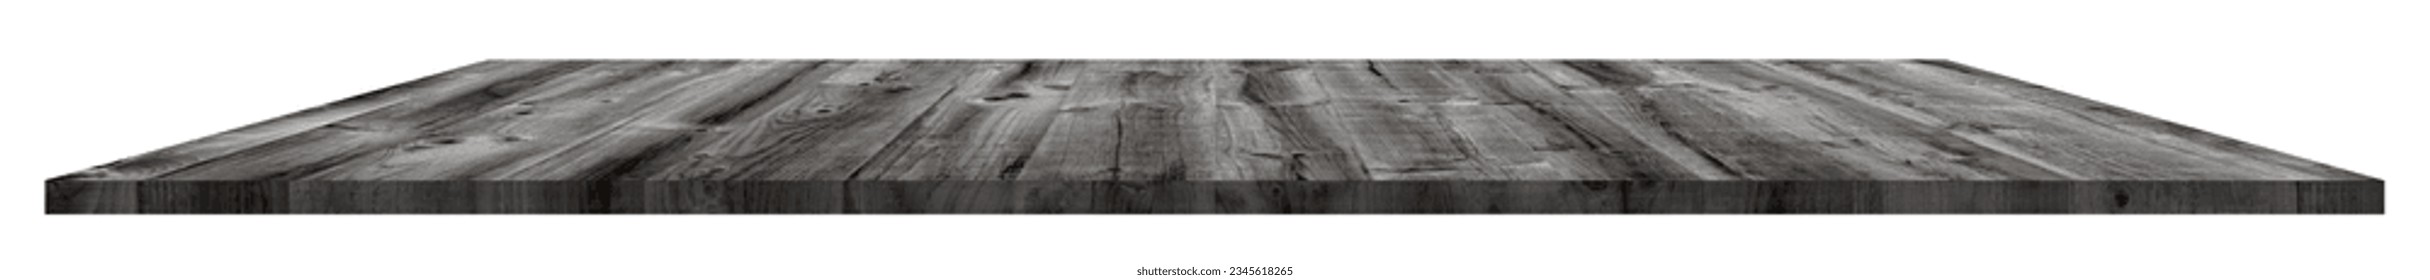 Wood texture countertop on white background, Isolated Perspective Grey Wooden shelves, Elements Template mock up for wood shelf display products